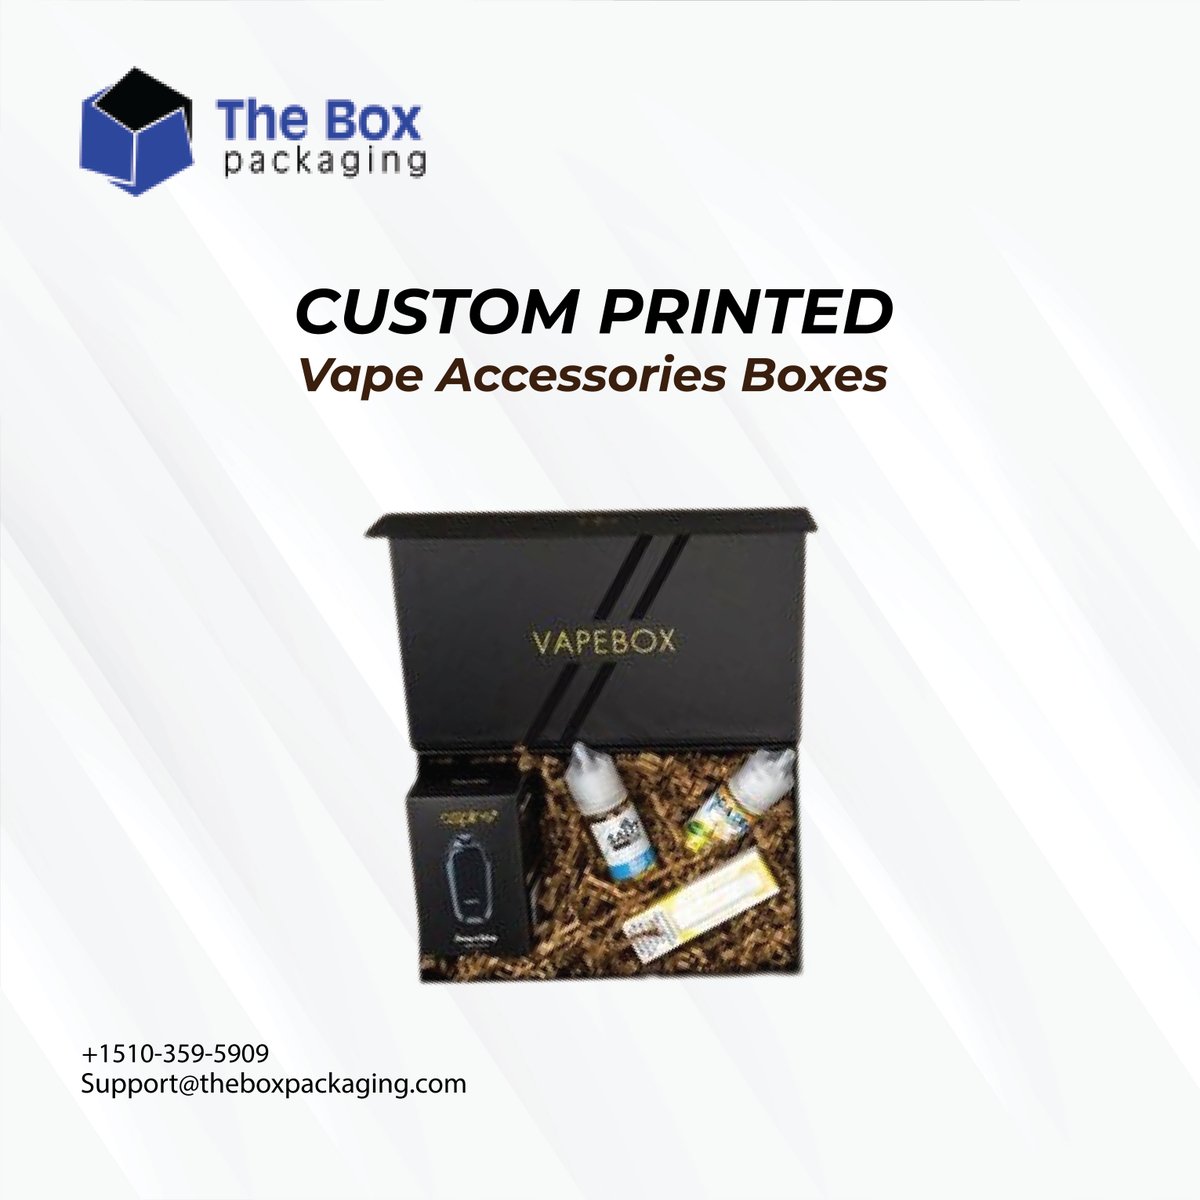 You accessorize the vape products, we provide special Vape Accessories Boxes!

 visit now theboxpackaging.com 

#theboxpackaging #boxpackaging #packagingboxes #packagingsolutions #customboxes #vapeaccessories #vapeaccessoriesbox #vapeaccessoriesboxes #vapeaccessoriespackaging